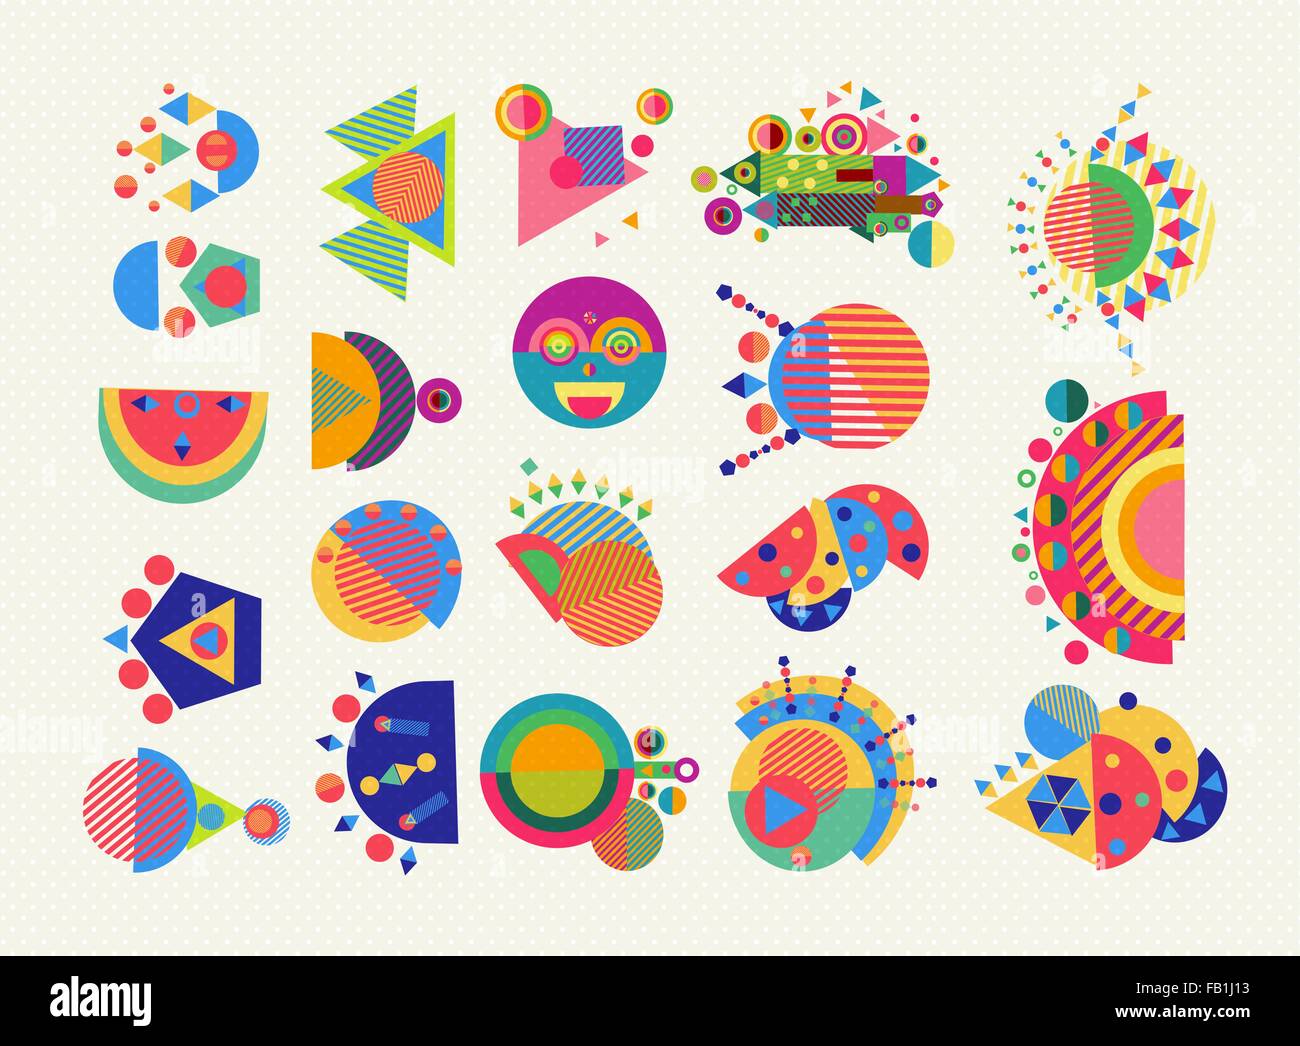 Set of geometry elements, abstract symbols and shapes in fun colorful style. EPS10 vector. Stock Vector